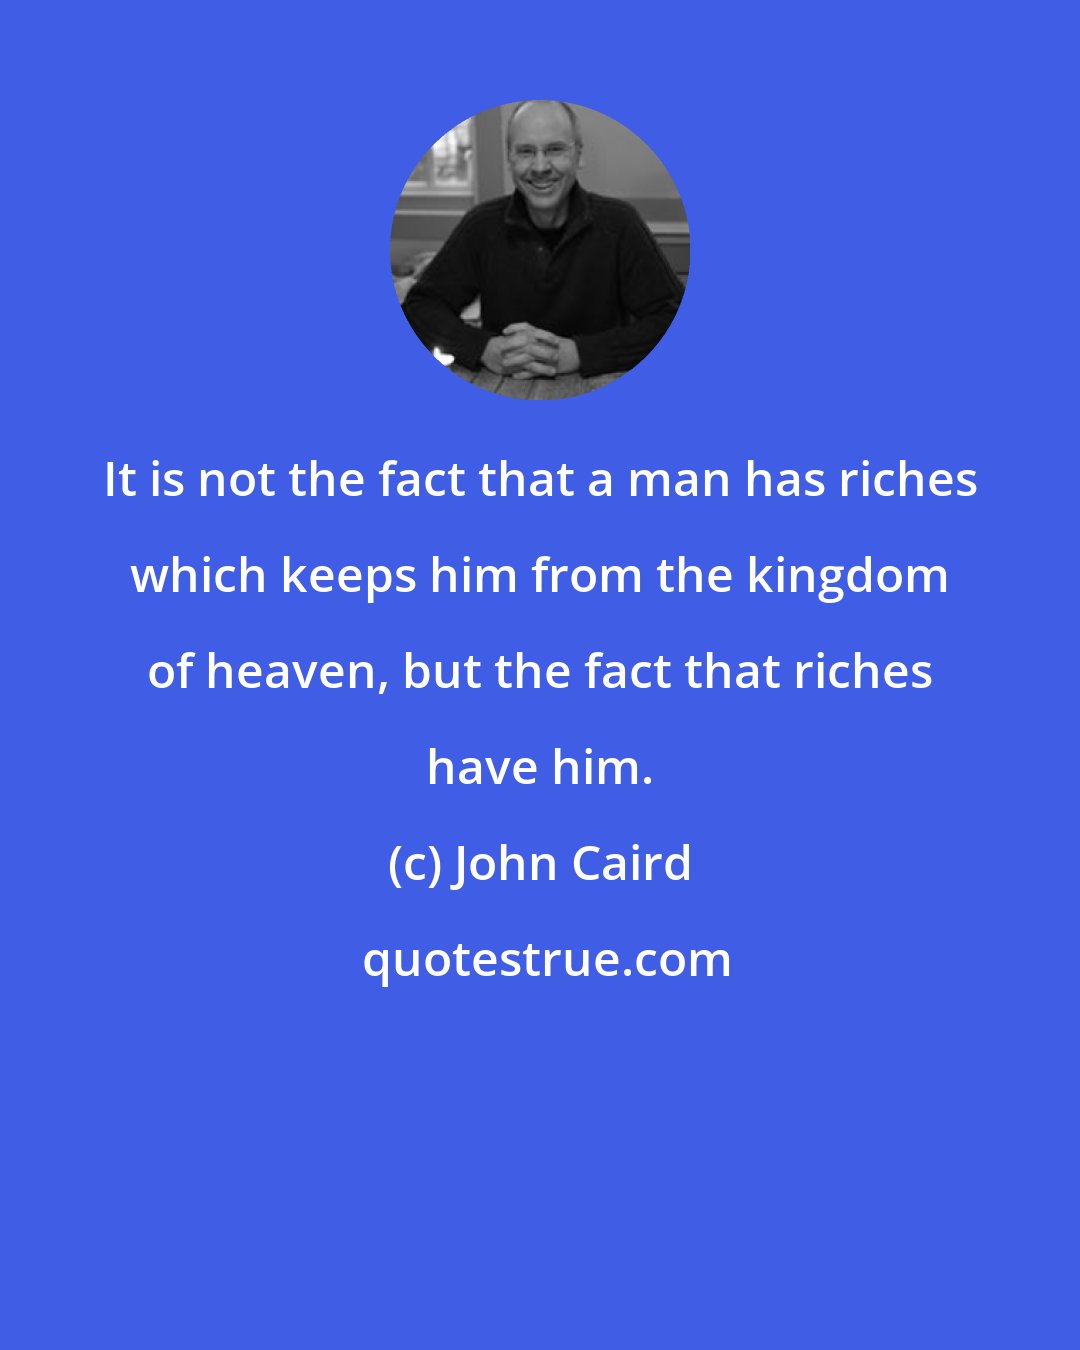 John Caird: It is not the fact that a man has riches which keeps him from the kingdom of heaven, but the fact that riches have him.